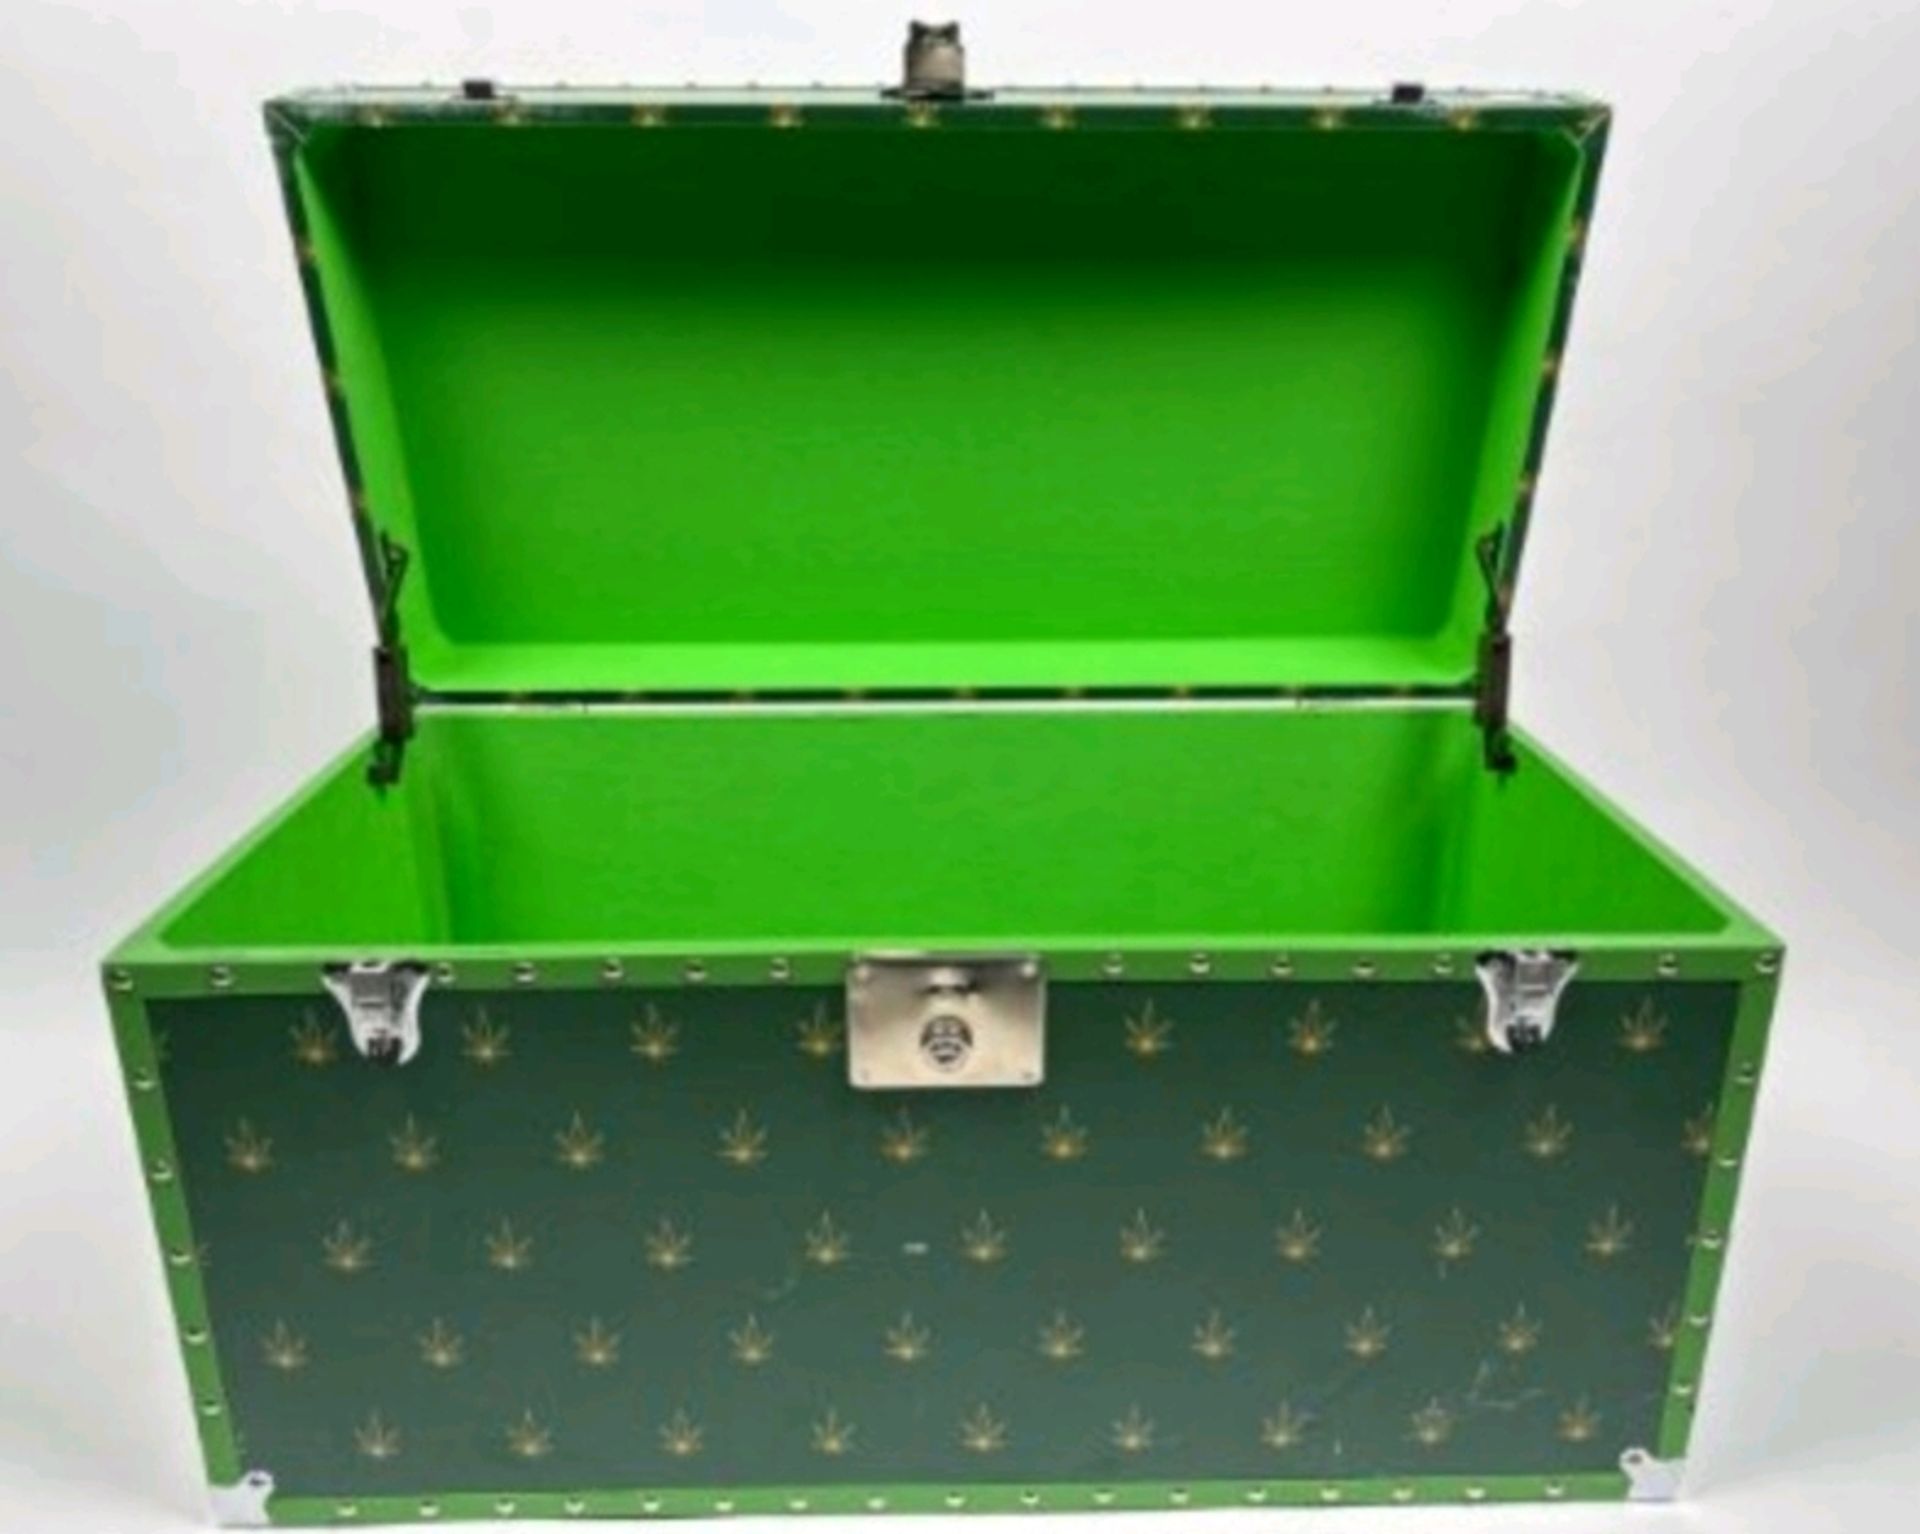 Casacarta Storage Chest With Leaf Print - Image 3 of 4